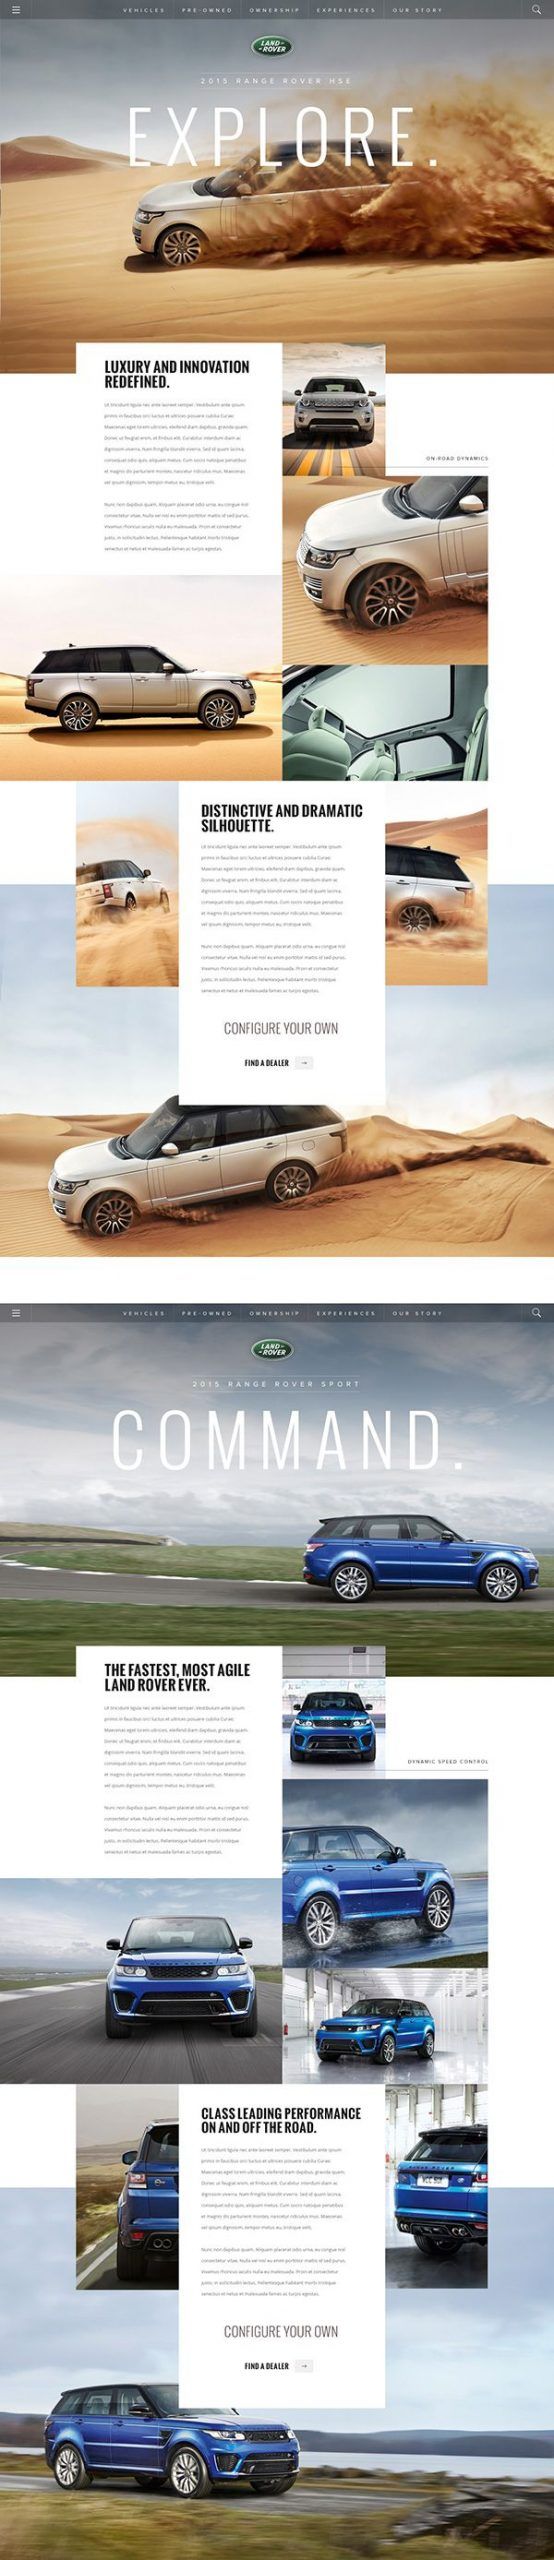 LandRover.com on Behance.  When looking for website design inspiration, look tow...